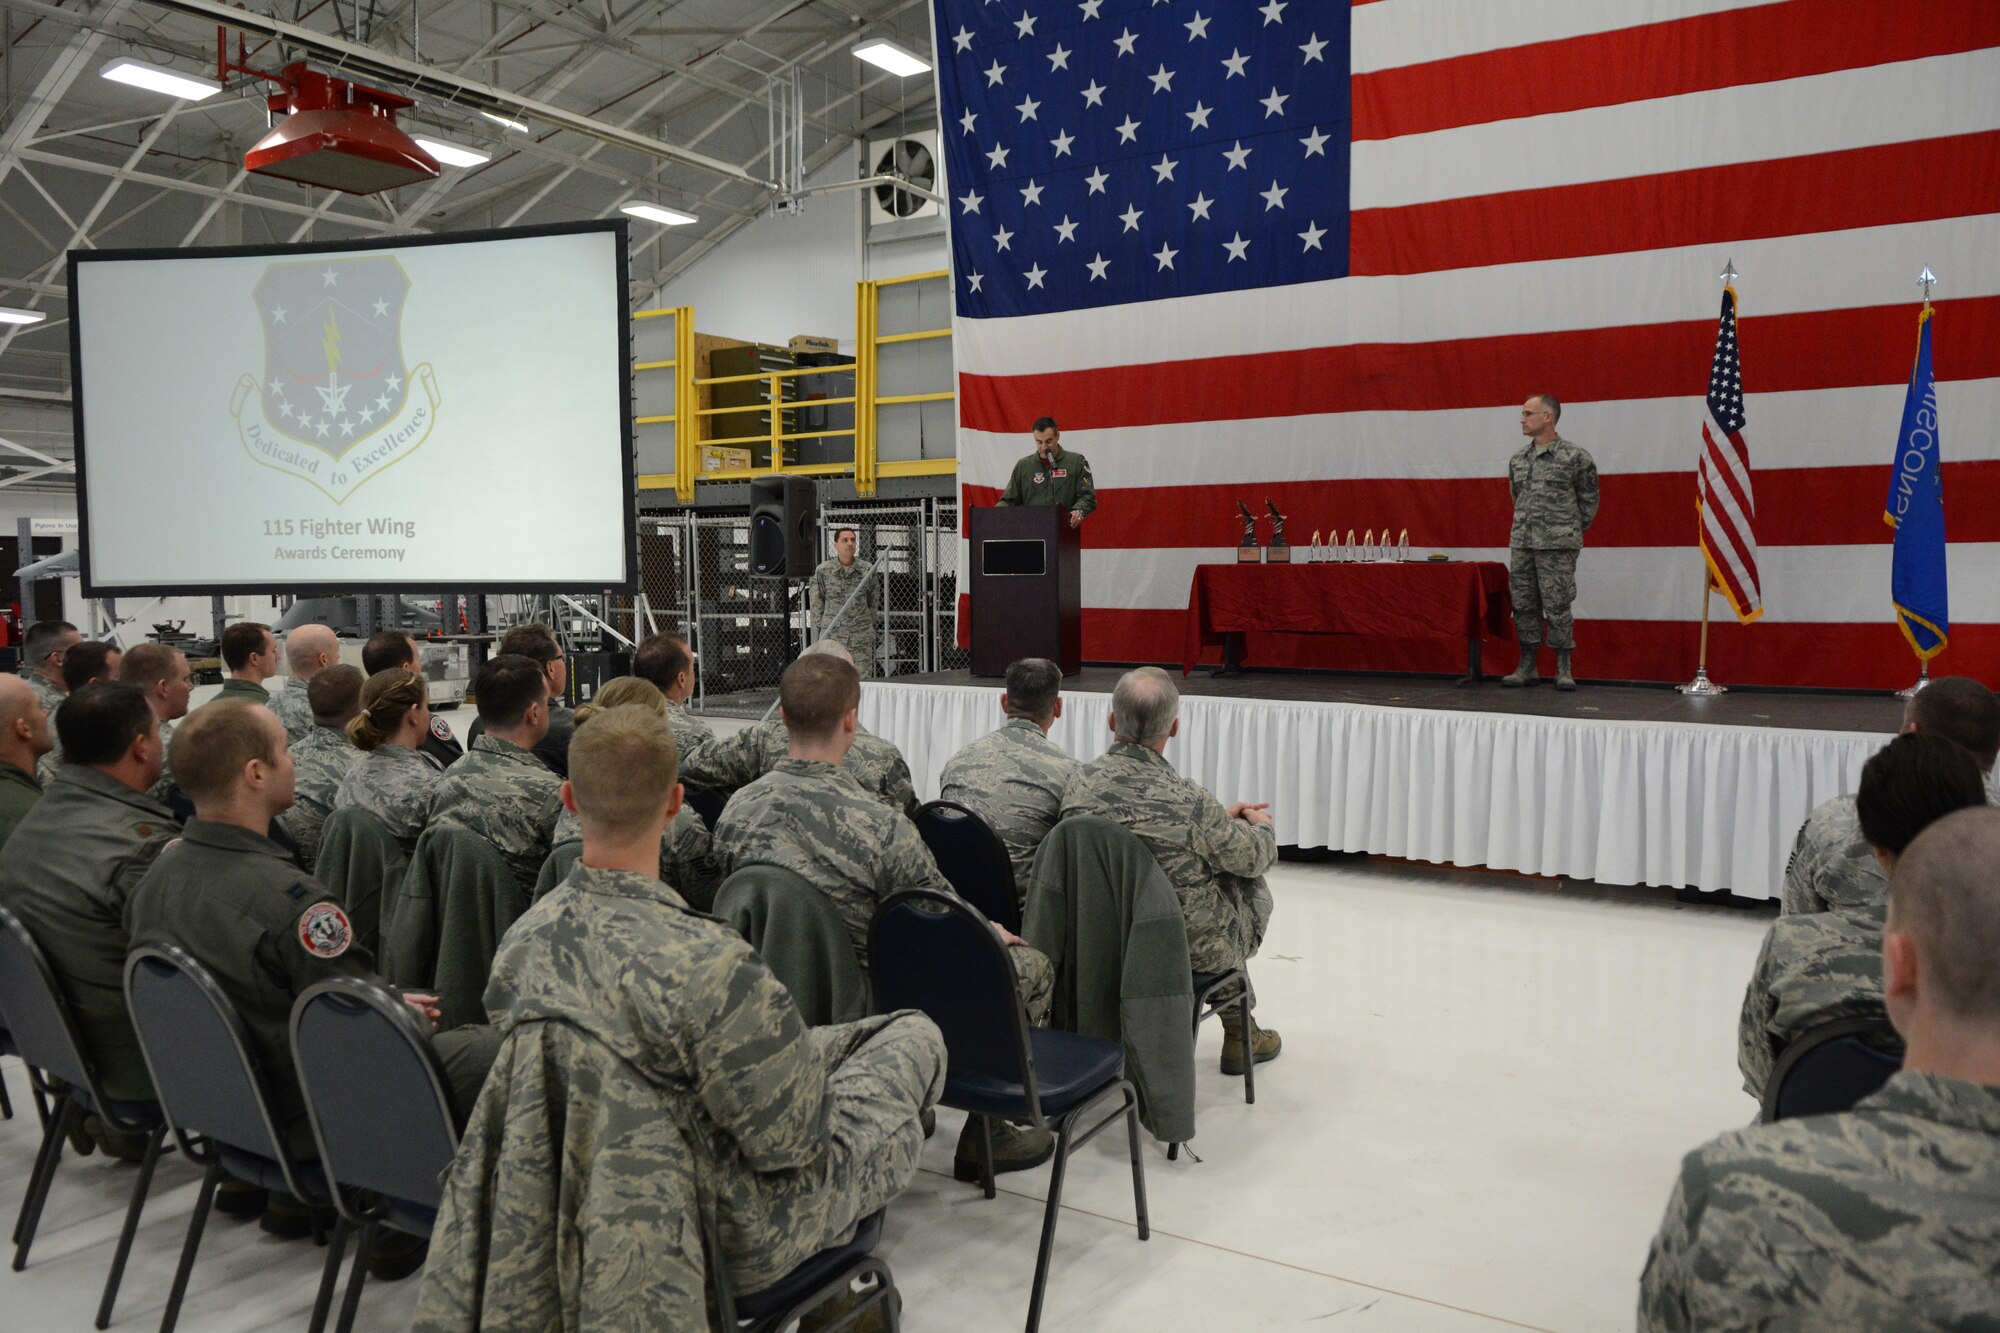 Col. Erik Peterson, 115th Fighter Wing commander, addresses Airmen from across the base at the 2016 Awards Ceremony in Hangar 406 on Jan. 7, 2017. During the ceremony, there were eight categories of awards presented, including Airman of the Year, Non-commissioned Officer of the Year and Company Grade Officer of the Year, among others. (U.S. Air National Guard photo by Staff Sgt. Kyle Russell)